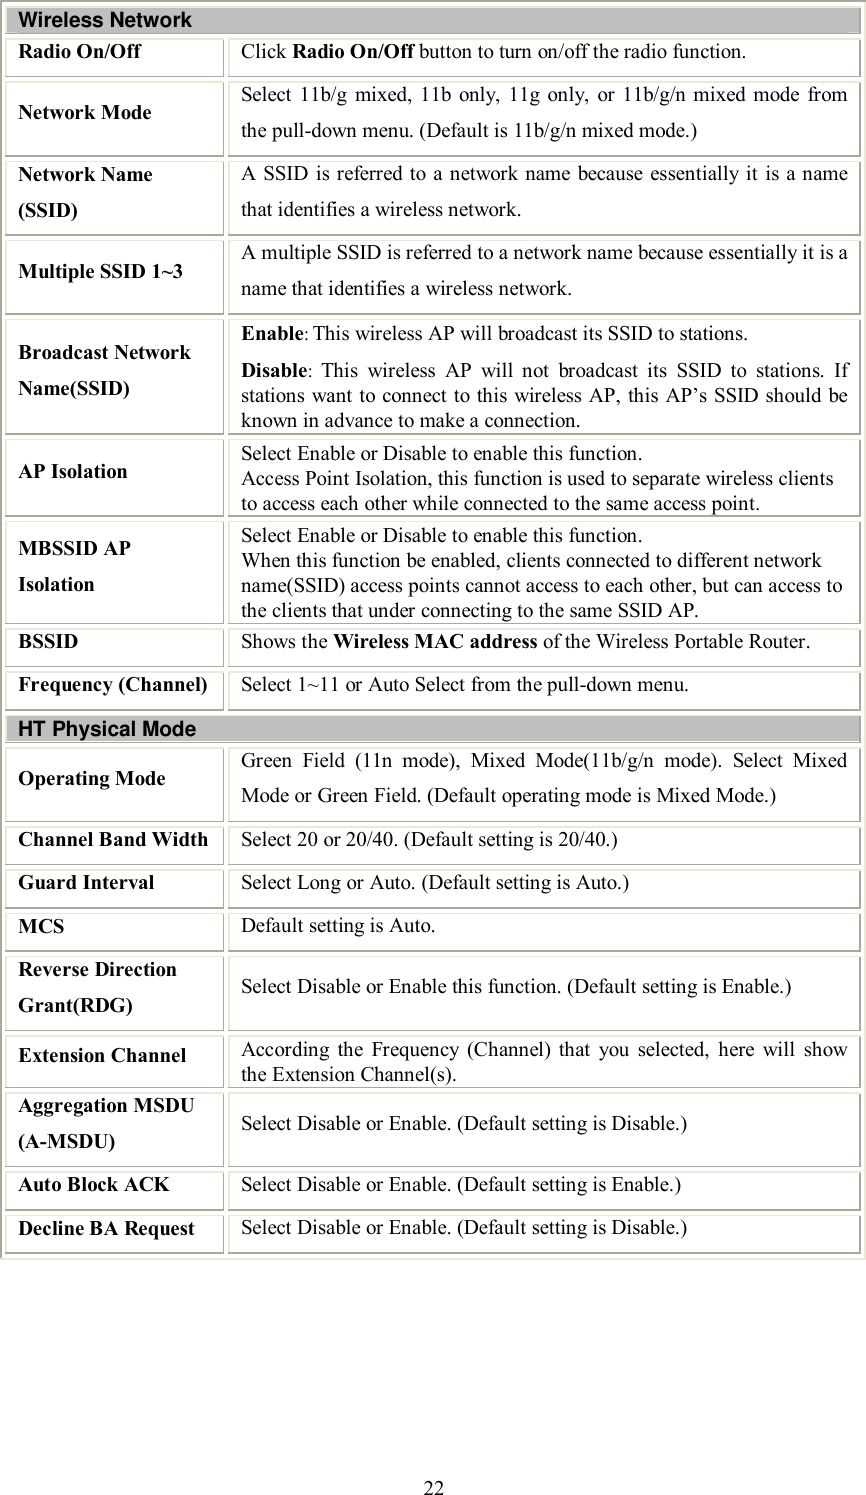    22 Wireless Network Radio On/Off  Click Radio On/Off button to turn on/off the radio function. Network Mode  Select 11b/g mixed, 11b only, 11g only, or 11b/g/n mixed mode from the pull-down menu. (Default is 11b/g/n mixed mode.) Network Name (SSID) A SSID is referred to a network name because essentially it is a name that identifies a wireless network. Multiple SSID 1~3  A multiple SSID is referred to a network name because essentially it is a name that identifies a wireless network. Broadcast Network Name(SSID) Enable: This wireless AP will broadcast its SSID to stations.  Disable: This wireless AP will not broadcast its SSID to stations. If stations want to connect to this wireless AP, this AP’s SSID should be known in advance to make a connection. AP Isolation  Select Enable or Disable to enable this function. Access Point Isolation, this function is used to separate wireless clients to access each other while connected to the same access point.  MBSSID AP Isolation Select Enable or Disable to enable this function. When this function be enabled, clients connected to different network name(SSID) access points cannot access to each other, but can access to the clients that under connecting to the same SSID AP.  BSSID   Shows the Wireless MAC address of the Wireless Portable Router. Frequency (Channel)  Select 1~11 or Auto Select from the pull-down menu. HT Physical Mode Operating Mode  Green Field (11n mode), Mixed Mode(11b/g/n mode). Select Mixed Mode or Green Field. (Default operating mode is Mixed Mode.) Channel Band Width Select 20 or 20/40. (Default setting is 20/40.) Guard Interval  Select Long or Auto. (Default setting is Auto.) MCS  Default setting is Auto. Reverse Direction Grant(RDG)  Select Disable or Enable this function. (Default setting is Enable.) Extension Channel  According the Frequency (Channel) that you selected, here will show the Extension Channel(s). Aggregation MSDU (A-MSDU)  Select Disable or Enable. (Default setting is Disable.) Auto Block ACK  Select Disable or Enable. (Default setting is Enable.) Decline BA Request  Select Disable or Enable. (Default setting is Disable.)   